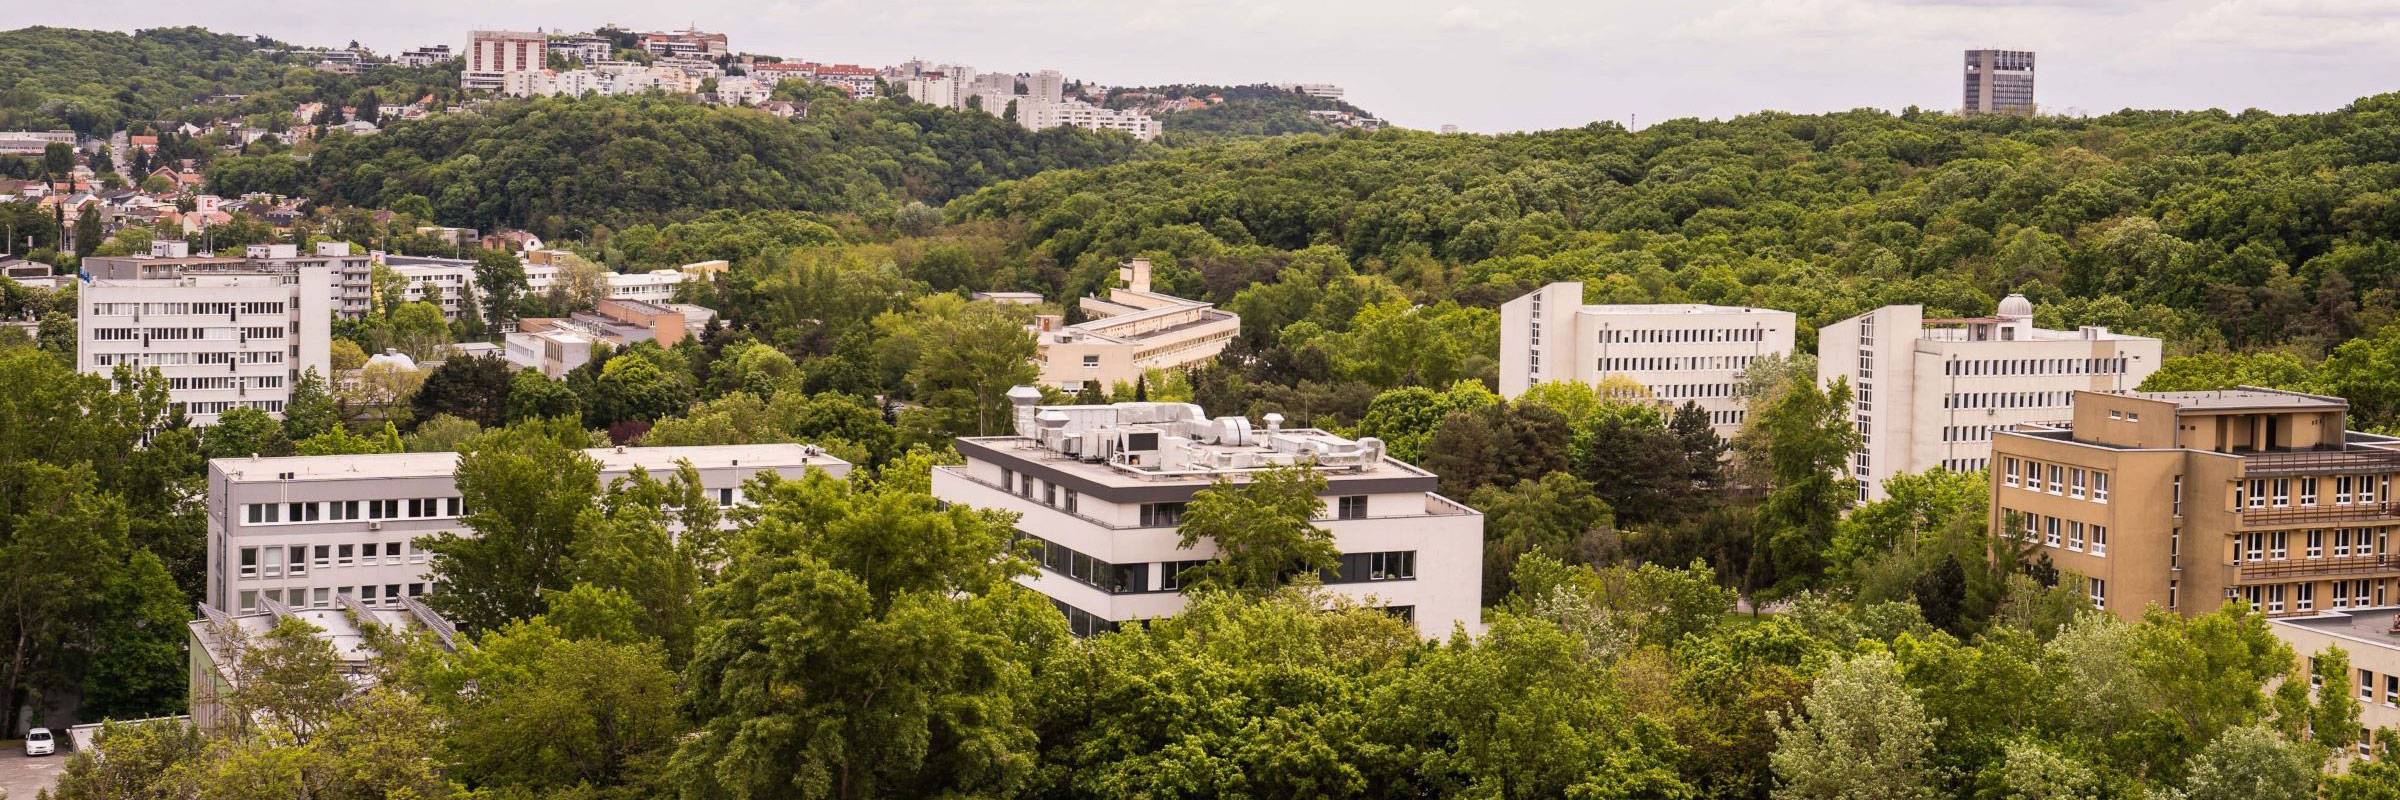 SAS wants to have a top science campus at Patrónka, announces an urban planning competition